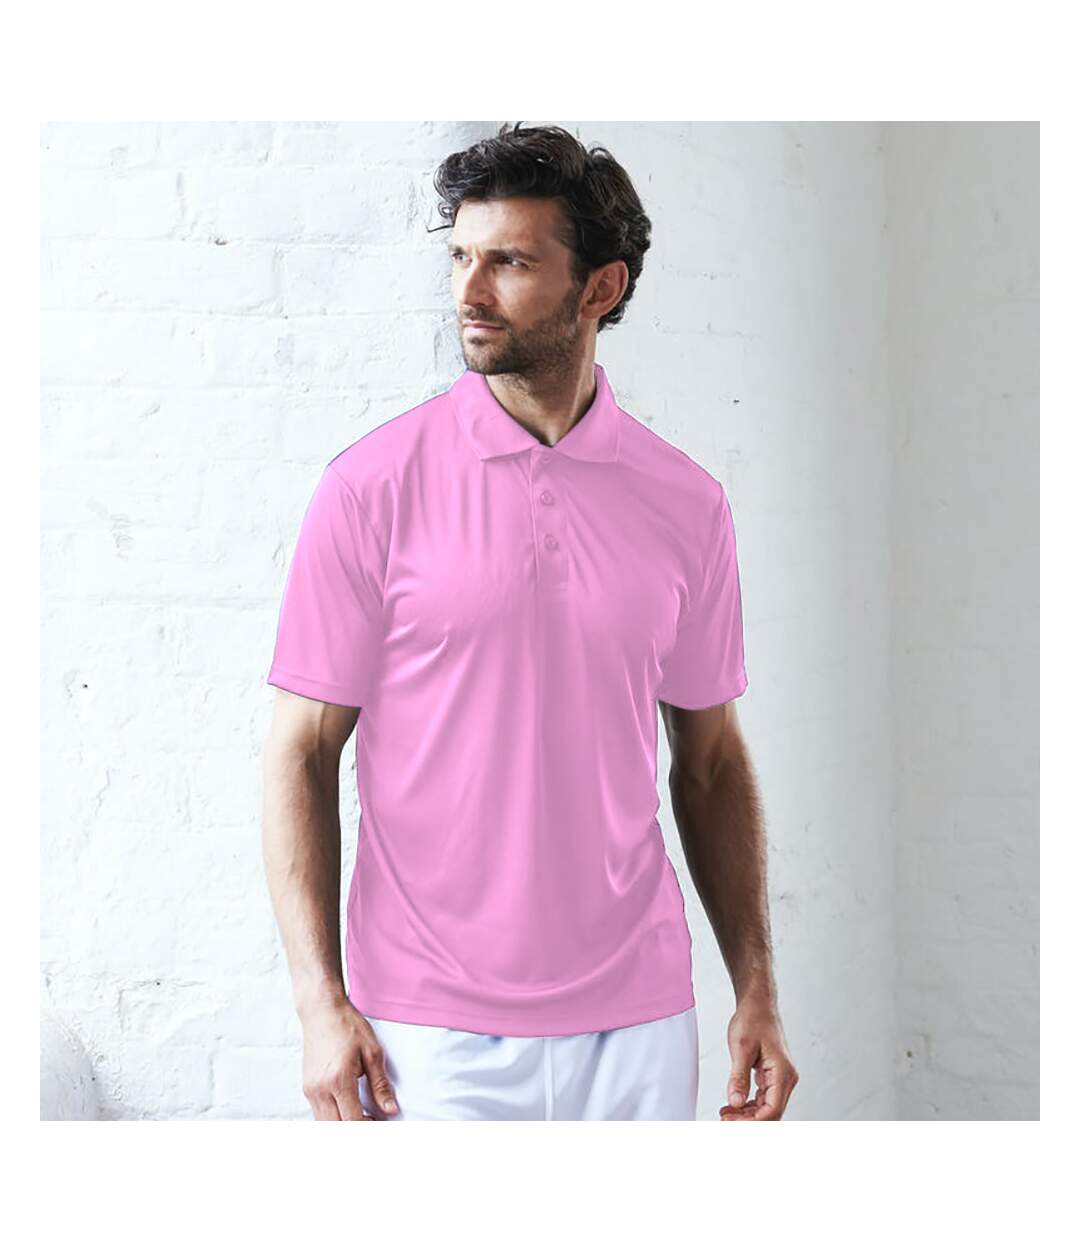 AWDis Just Cool - Polo - Homme (Rose) - UTPC2632